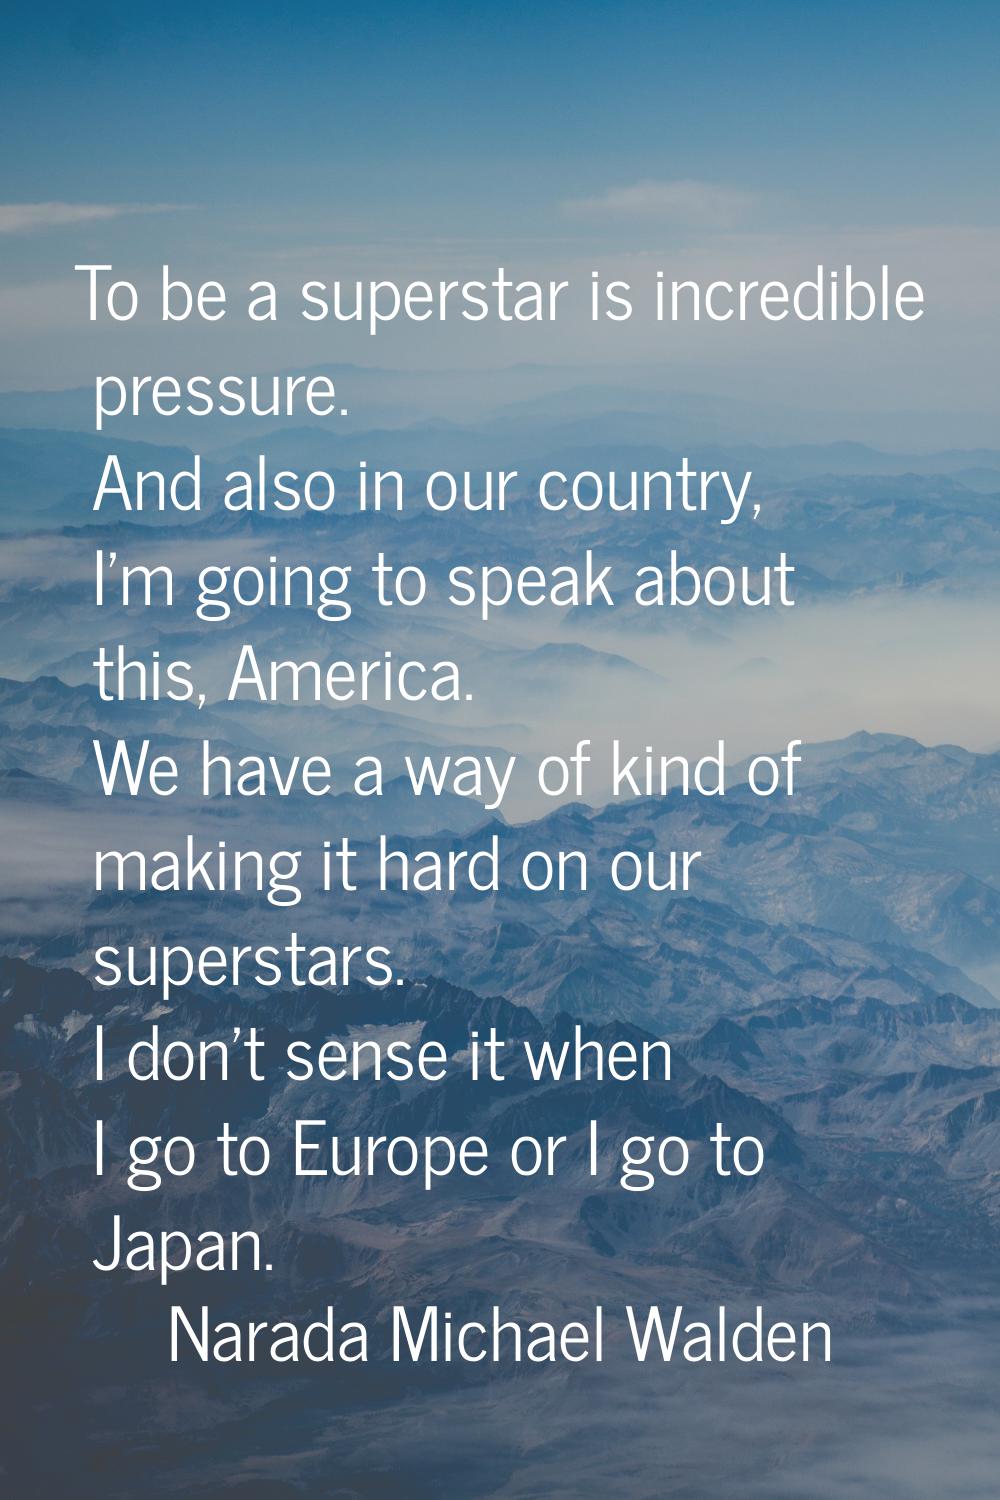 To be a superstar is incredible pressure. And also in our country, I'm going to speak about this, A